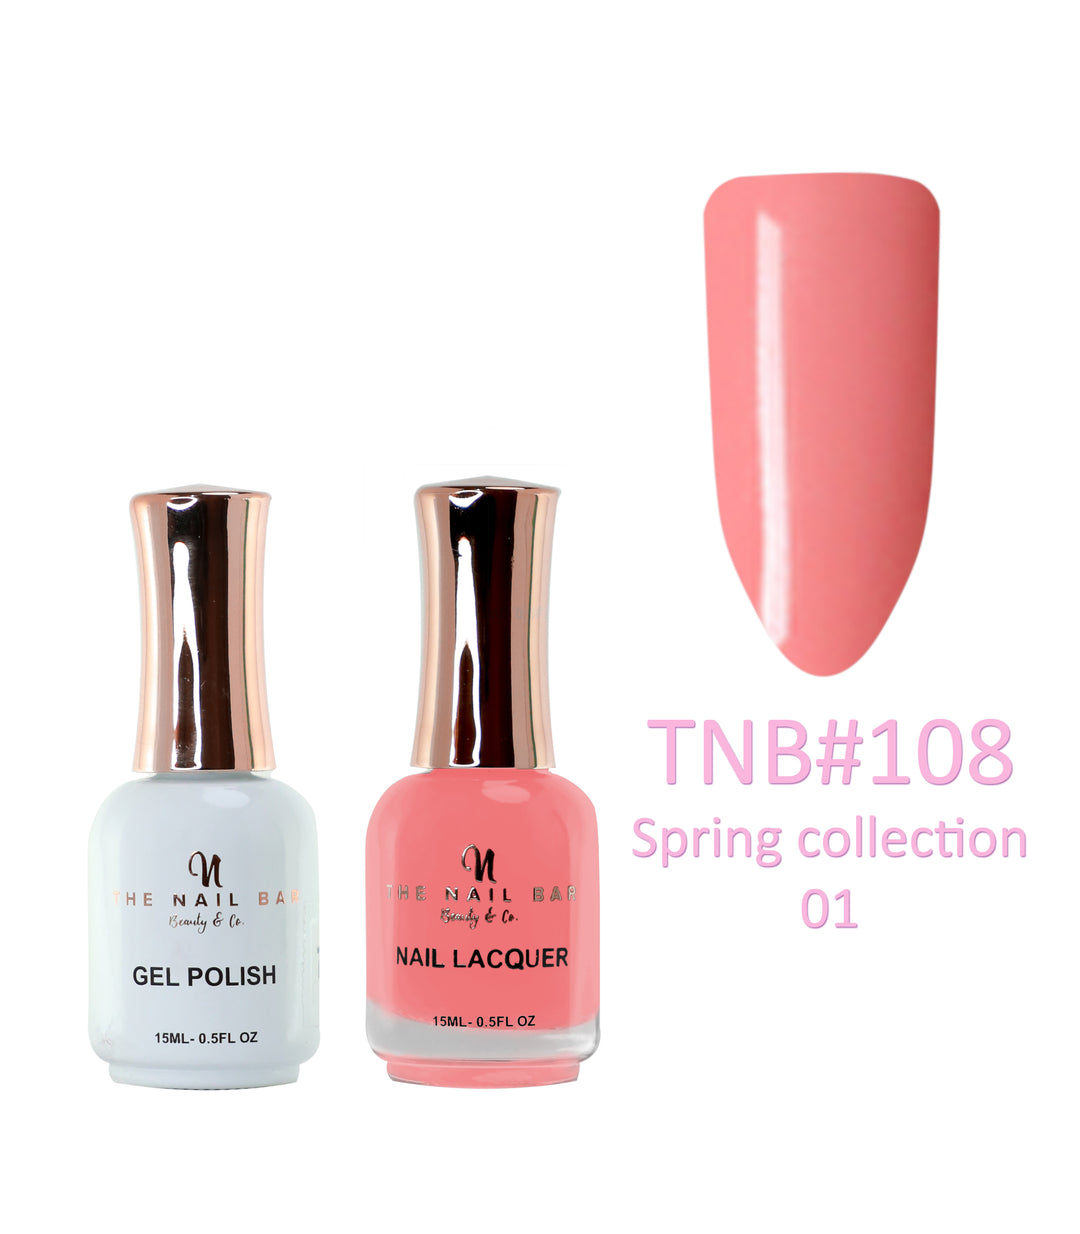 Dual Polish/Gel colour matching (15ml) - Spring collection 01